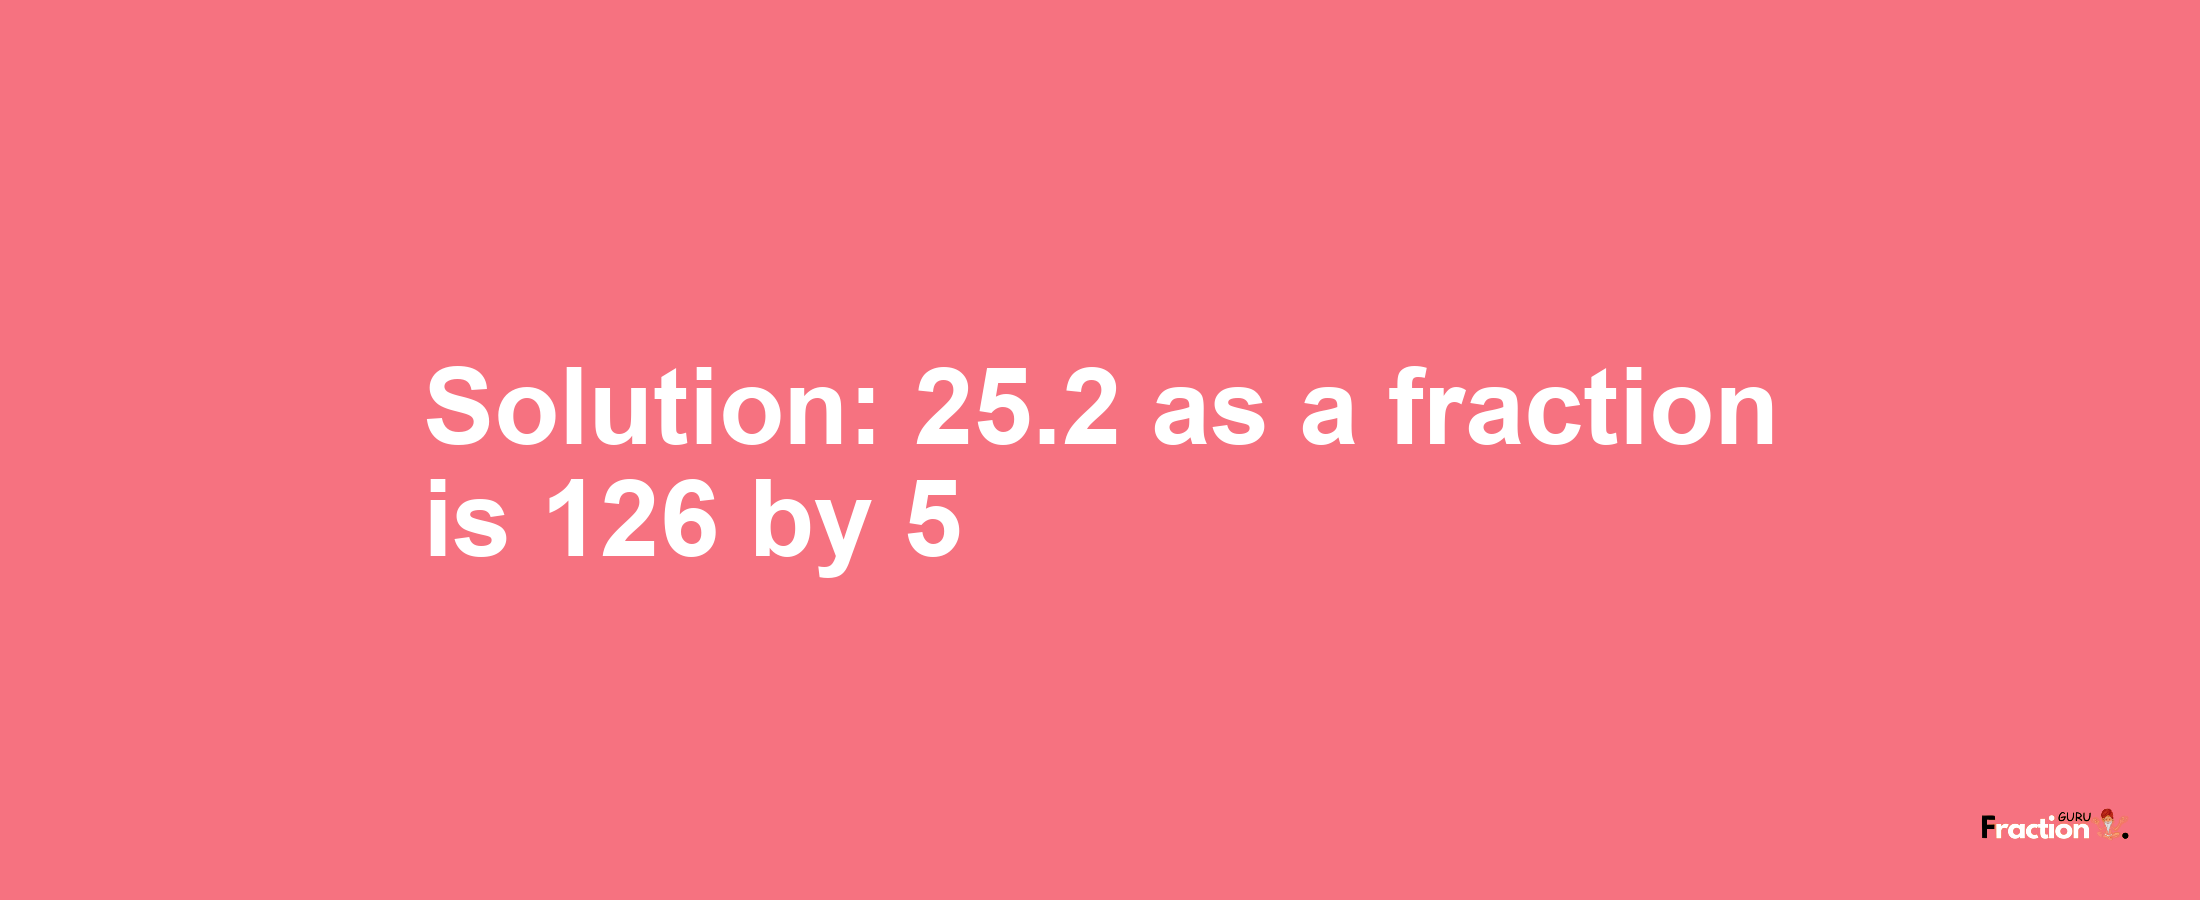 Solution:25.2 as a fraction is 126/5